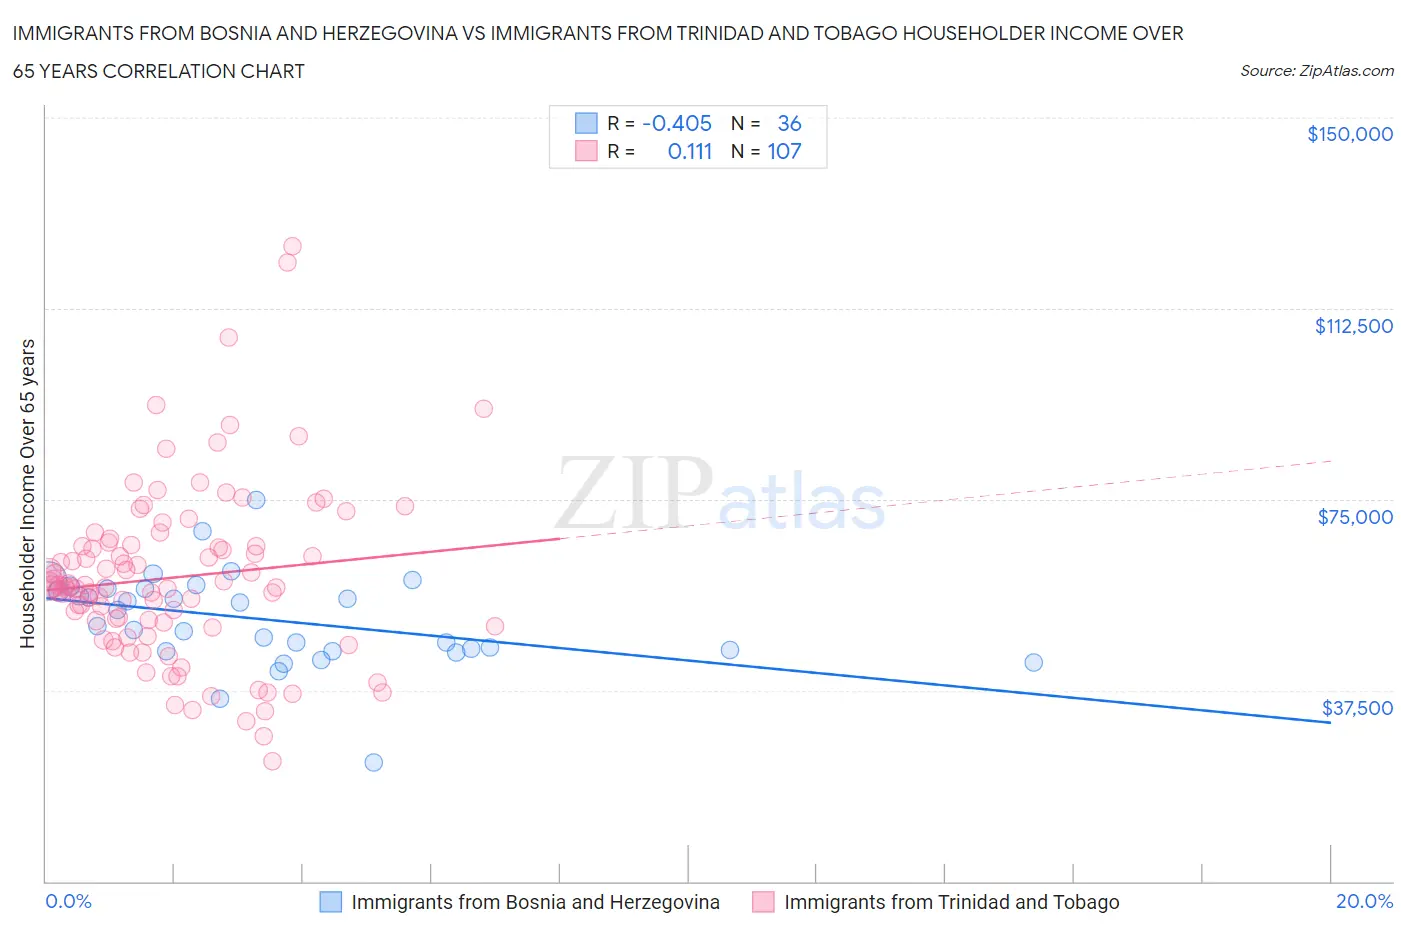 Immigrants from Bosnia and Herzegovina vs Immigrants from Trinidad and Tobago Householder Income Over 65 years